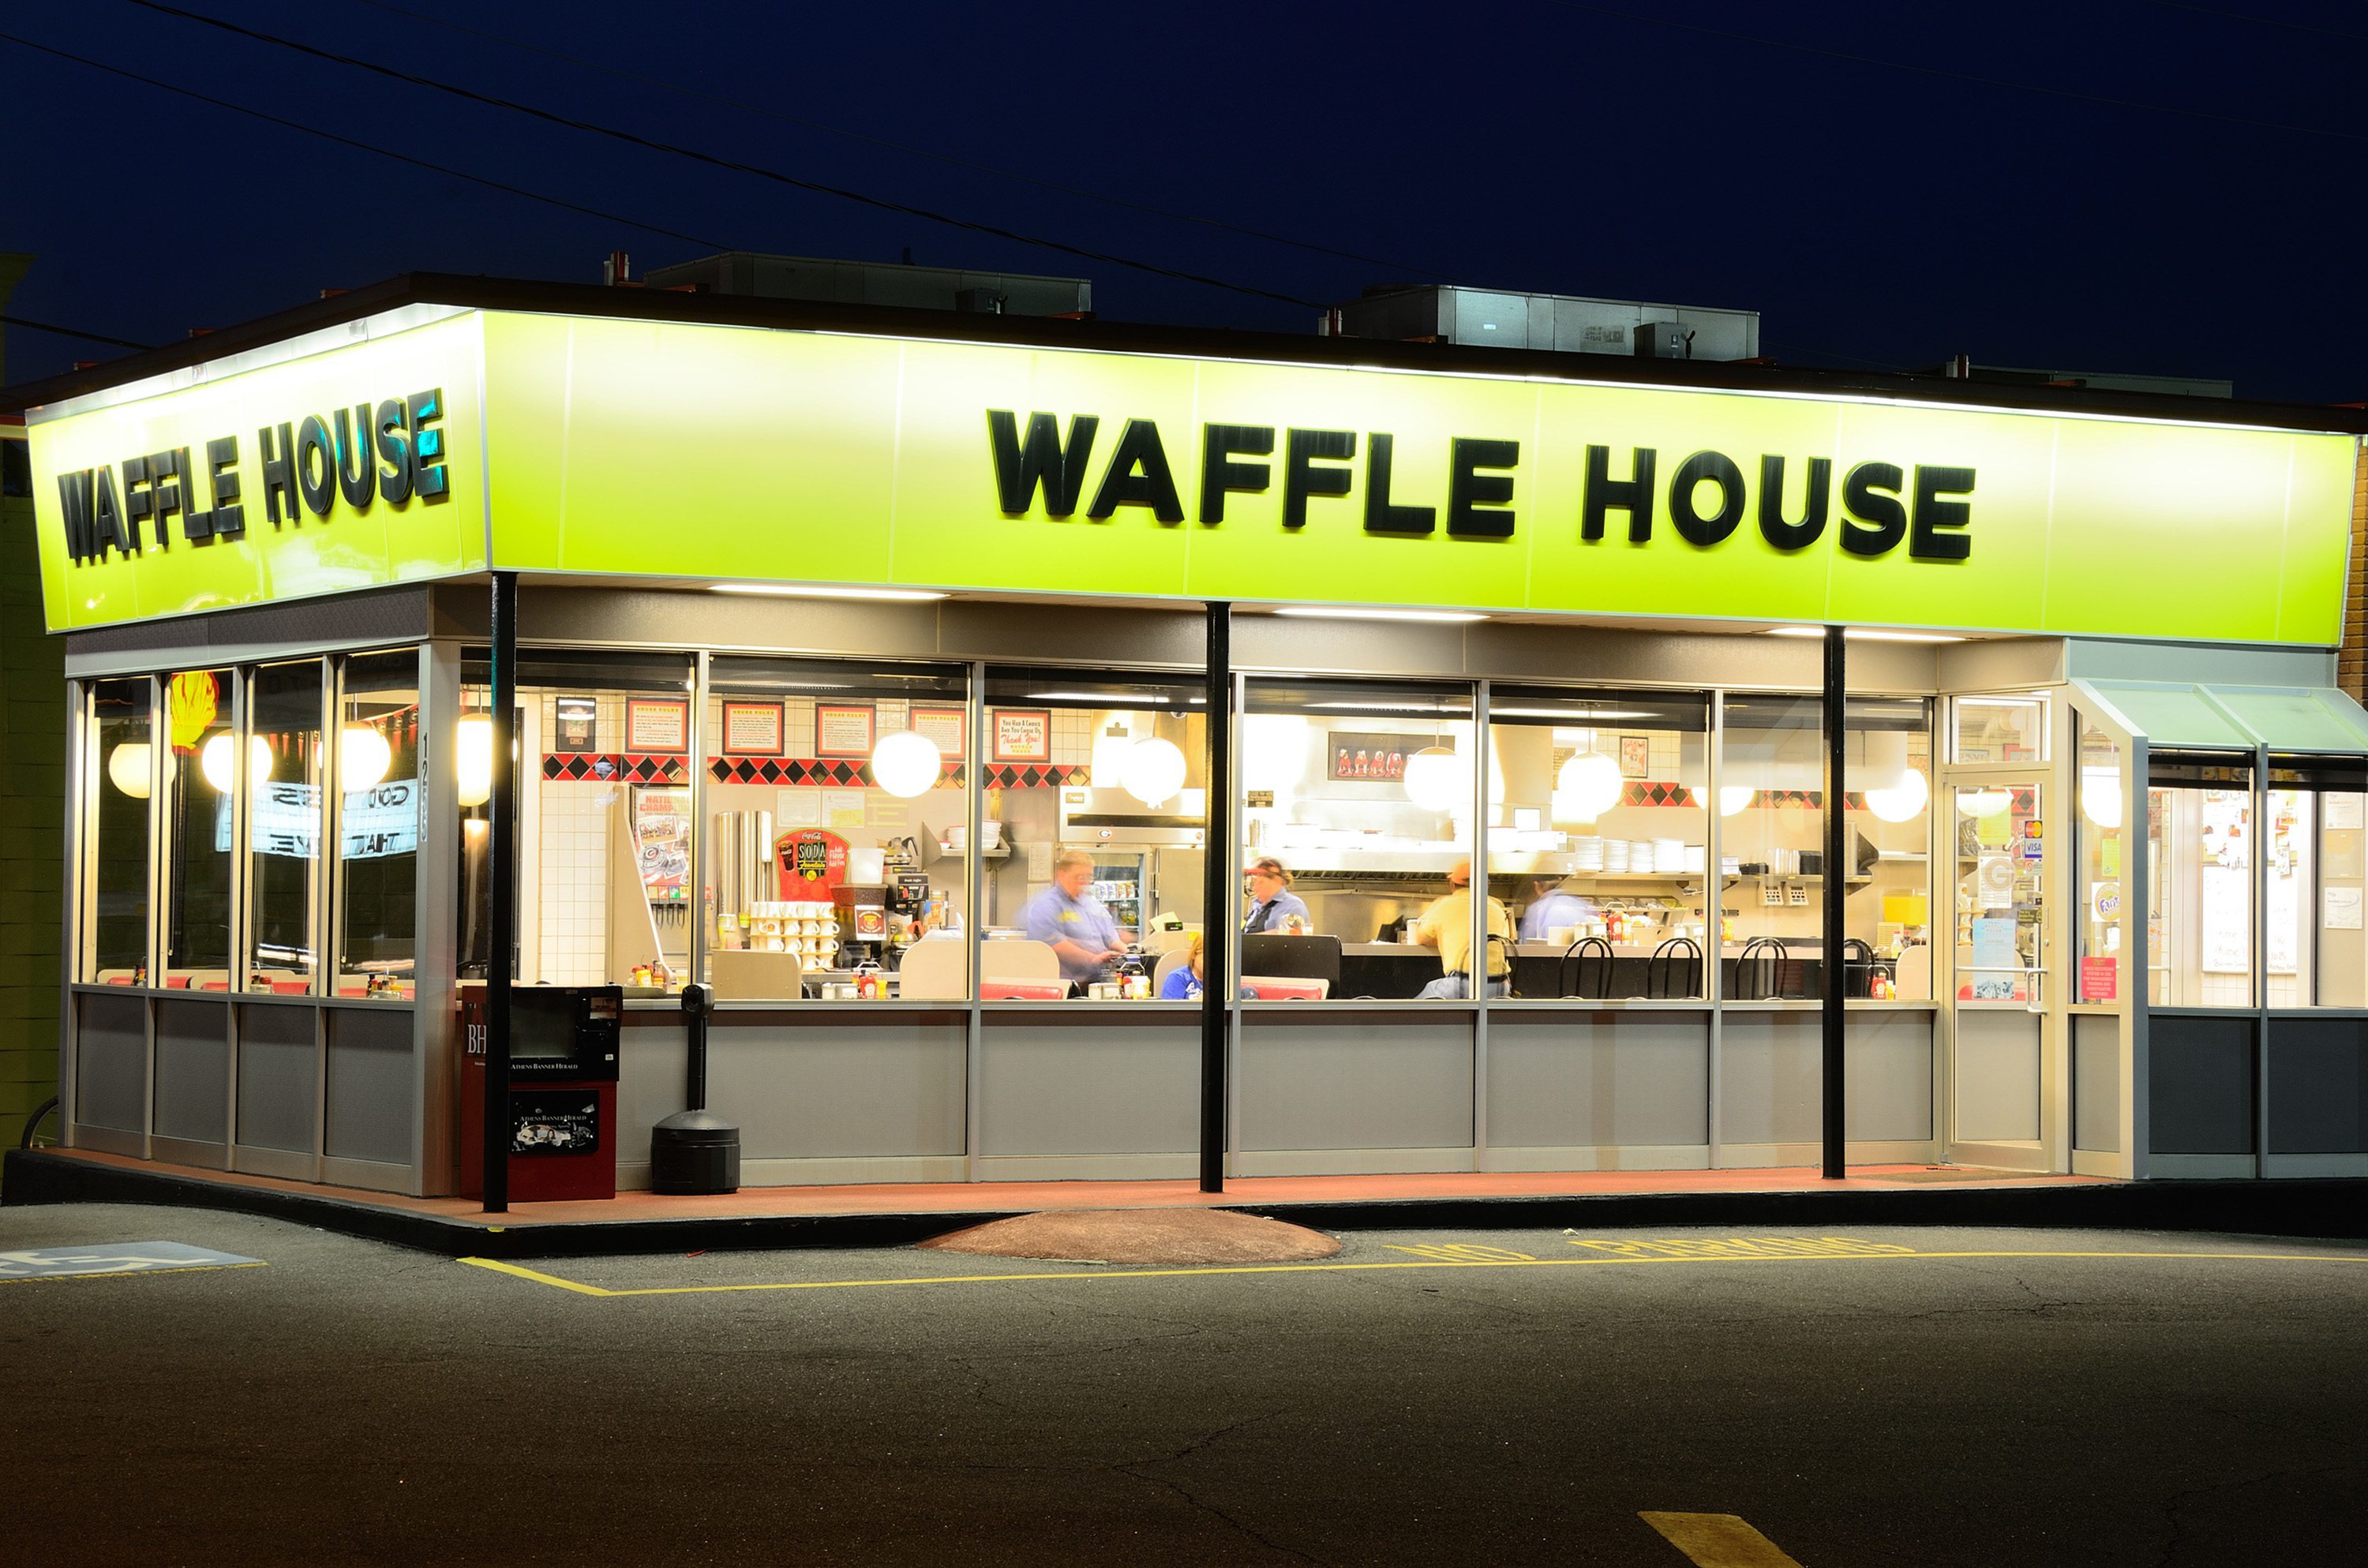 Brawler's breasts pop out and her wig falls off during angry Waffle House  brawl